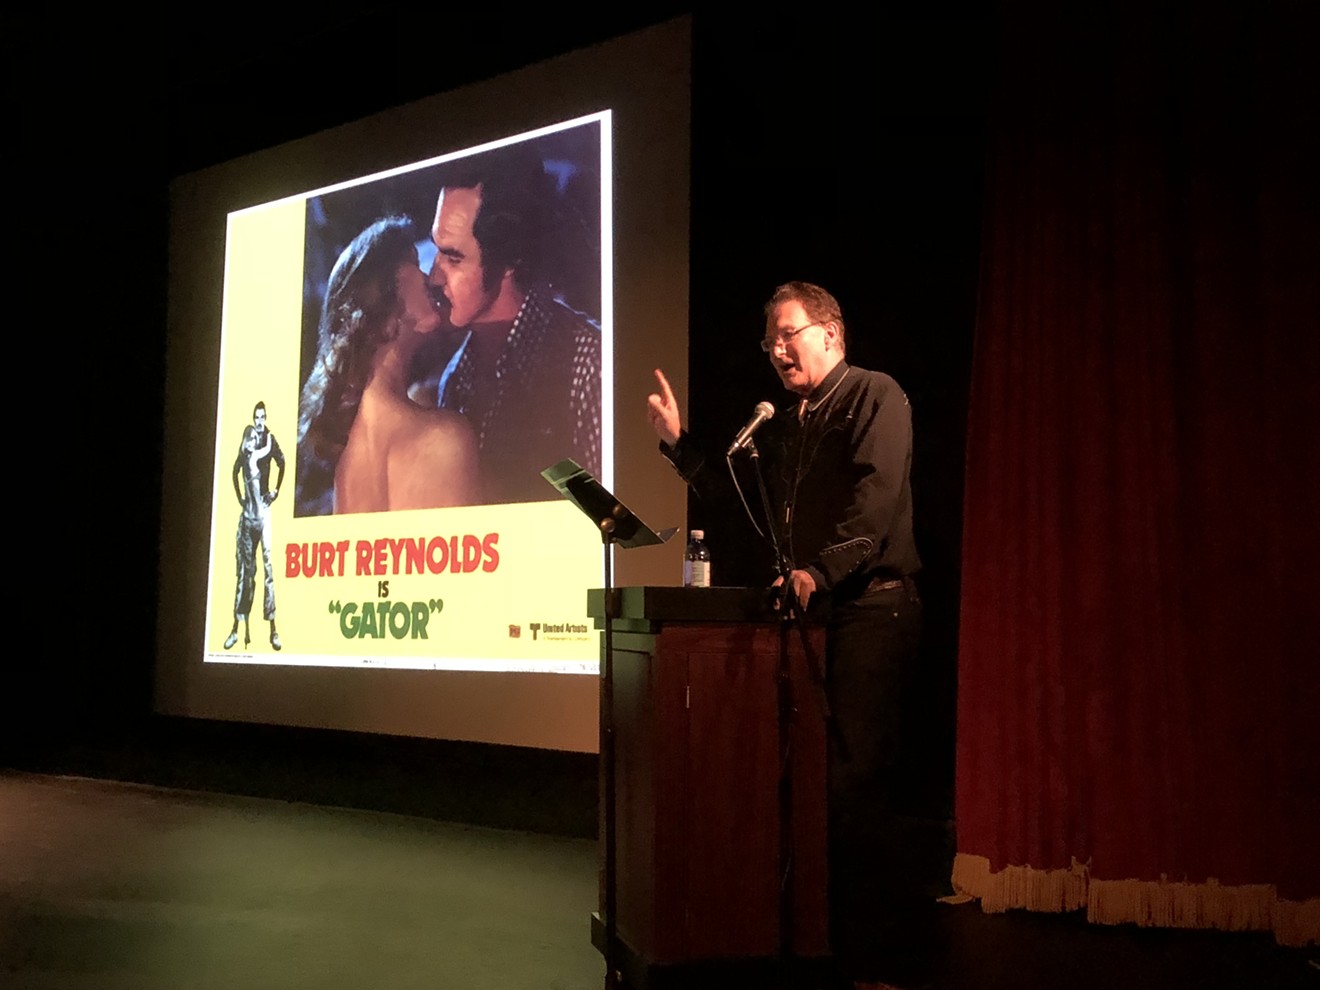 Drive-in movie critic Joe Bob Briggs takes an audience in Boston through the history of the redneck in film.